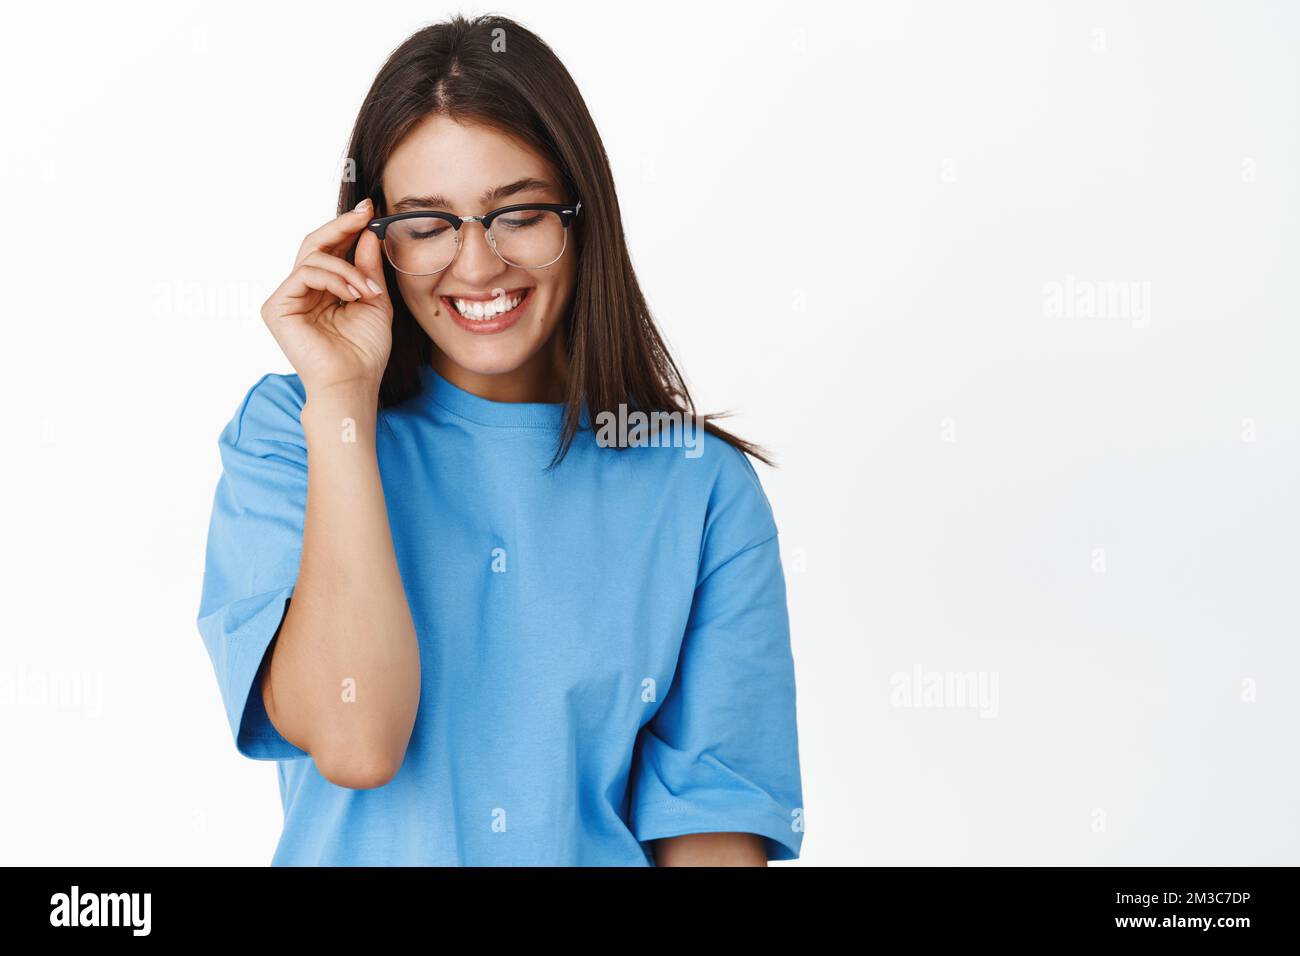 Beautiful young girl student in glasses, trying new eyewear at optic store, standing in blue t-shirt over white background Stock Photo